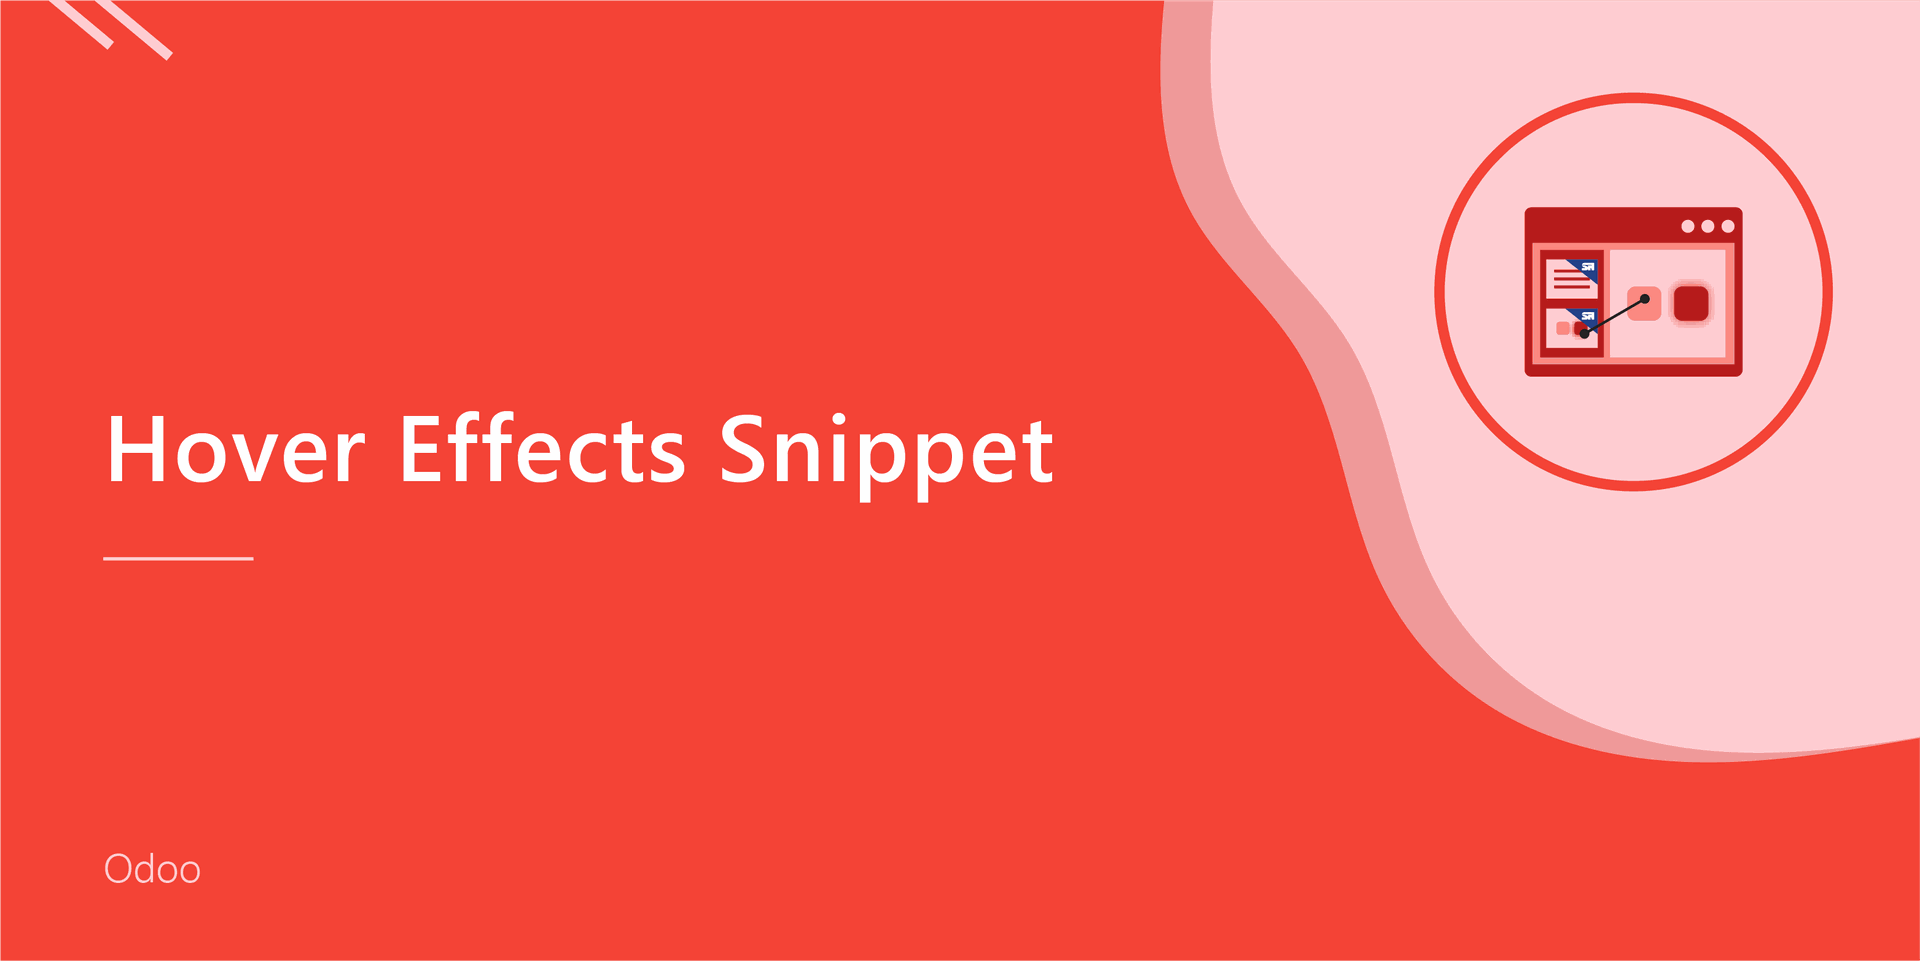 Hover Effects Snippet